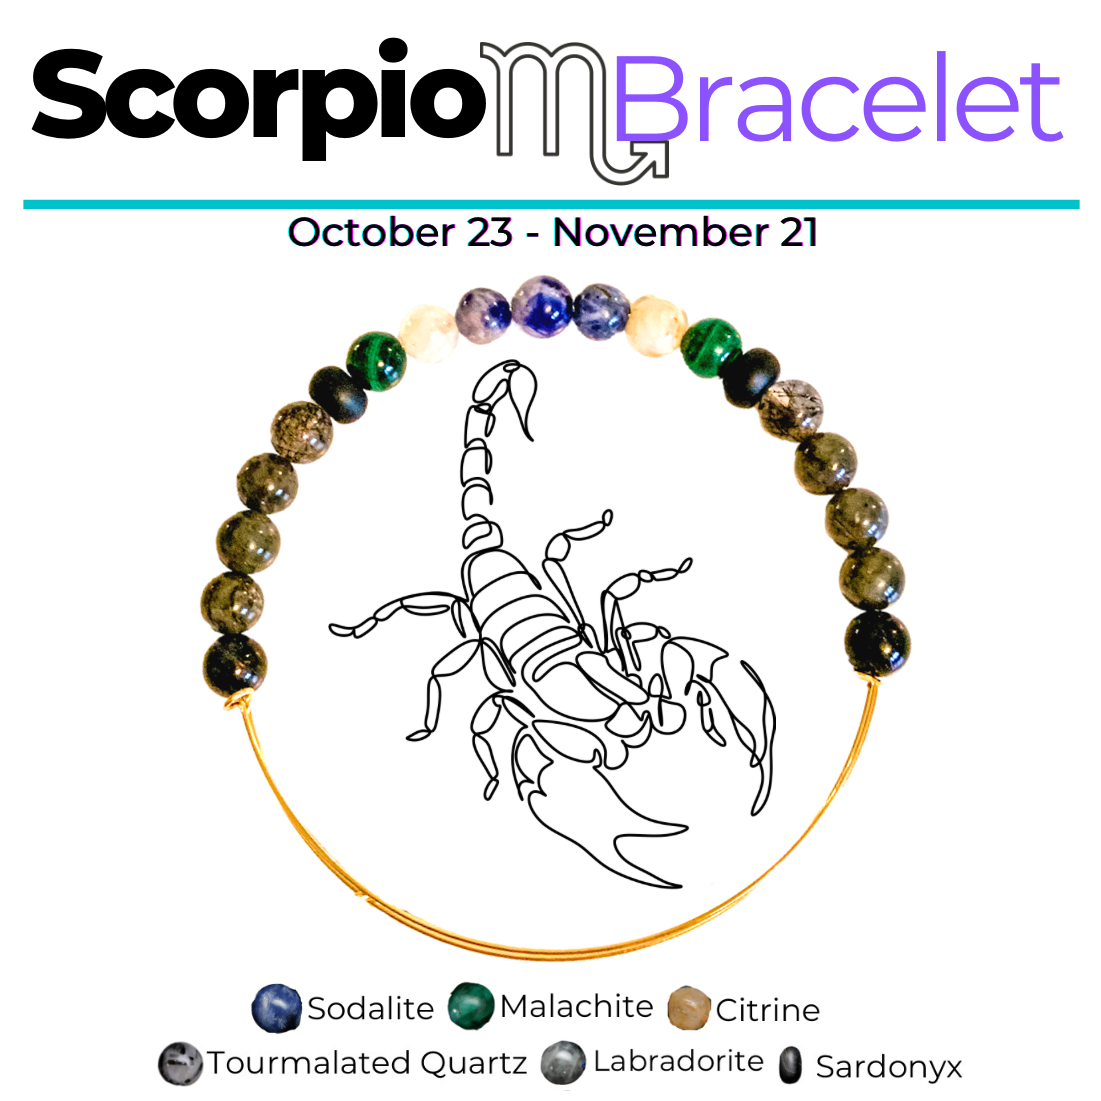 Scorpio Bracelet paired with its informational guide, perfect for gifting Scorpio traits.